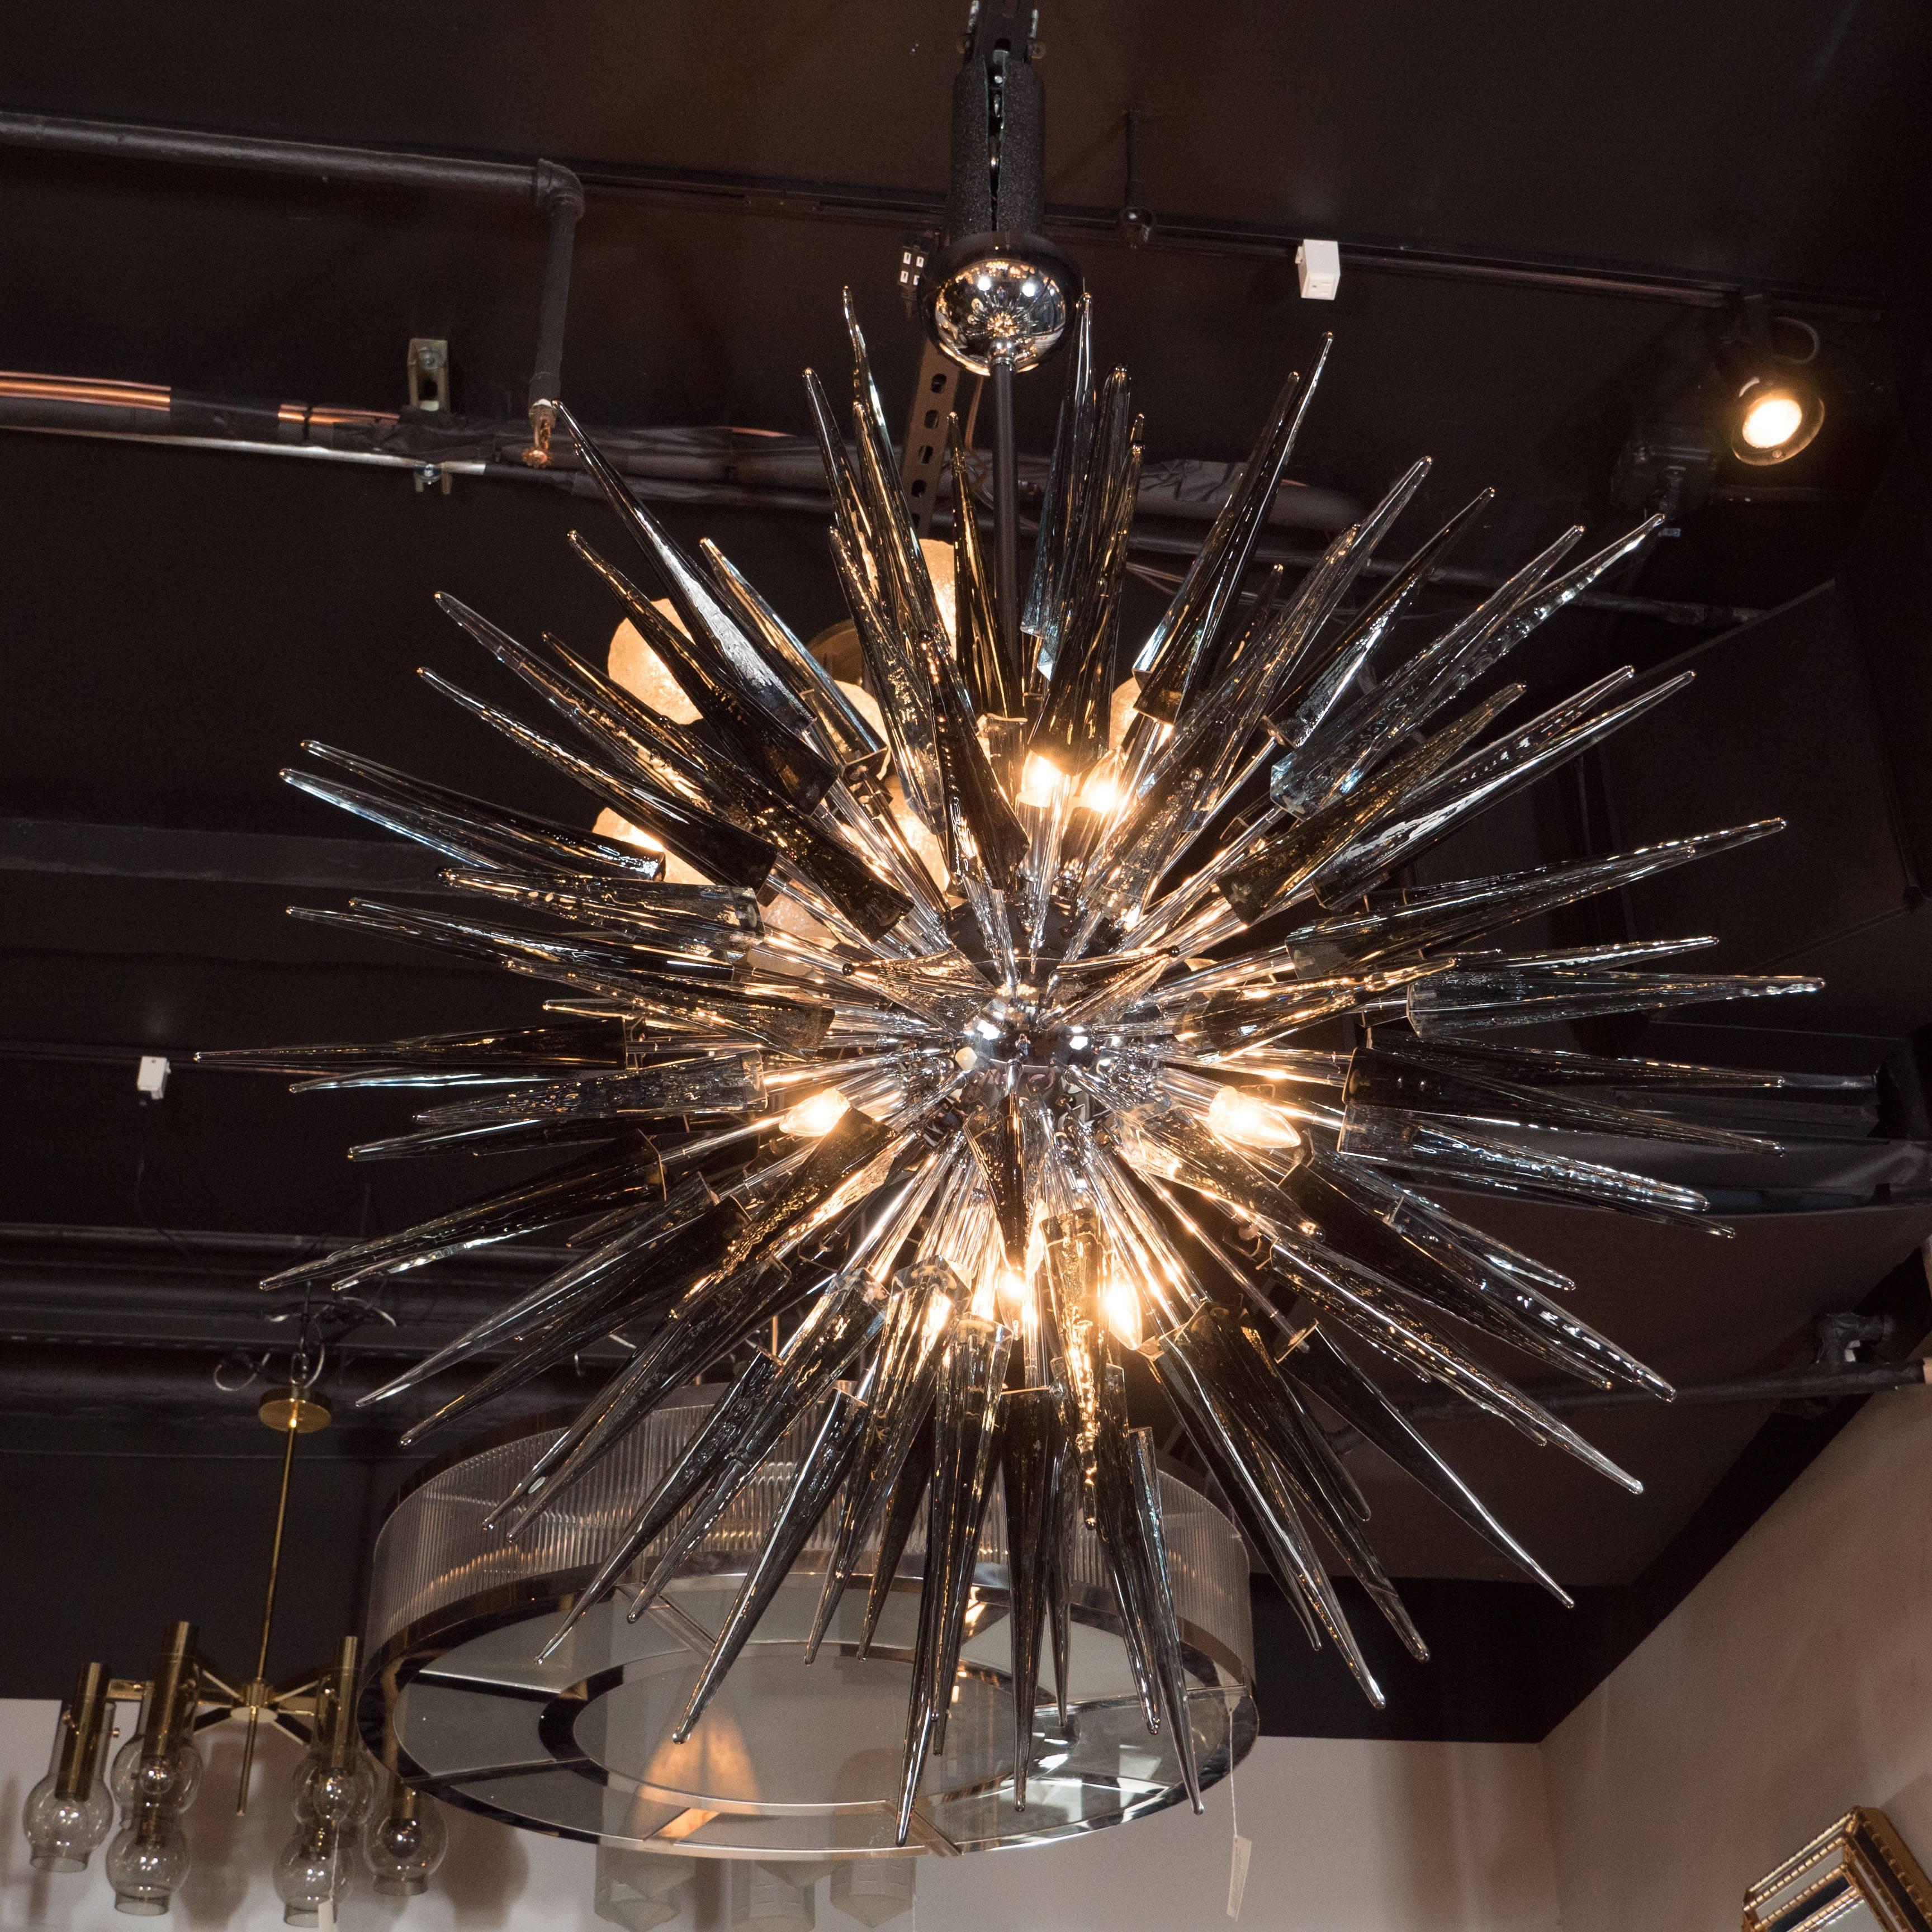 This stunning Murano glass spiked starburst chandelier was hand blown in Murano, Italy- the island off the coast of Venice renowned for centuries for its superlative glass production. The fixture offers an abundance of obelisks in hand blown smoked